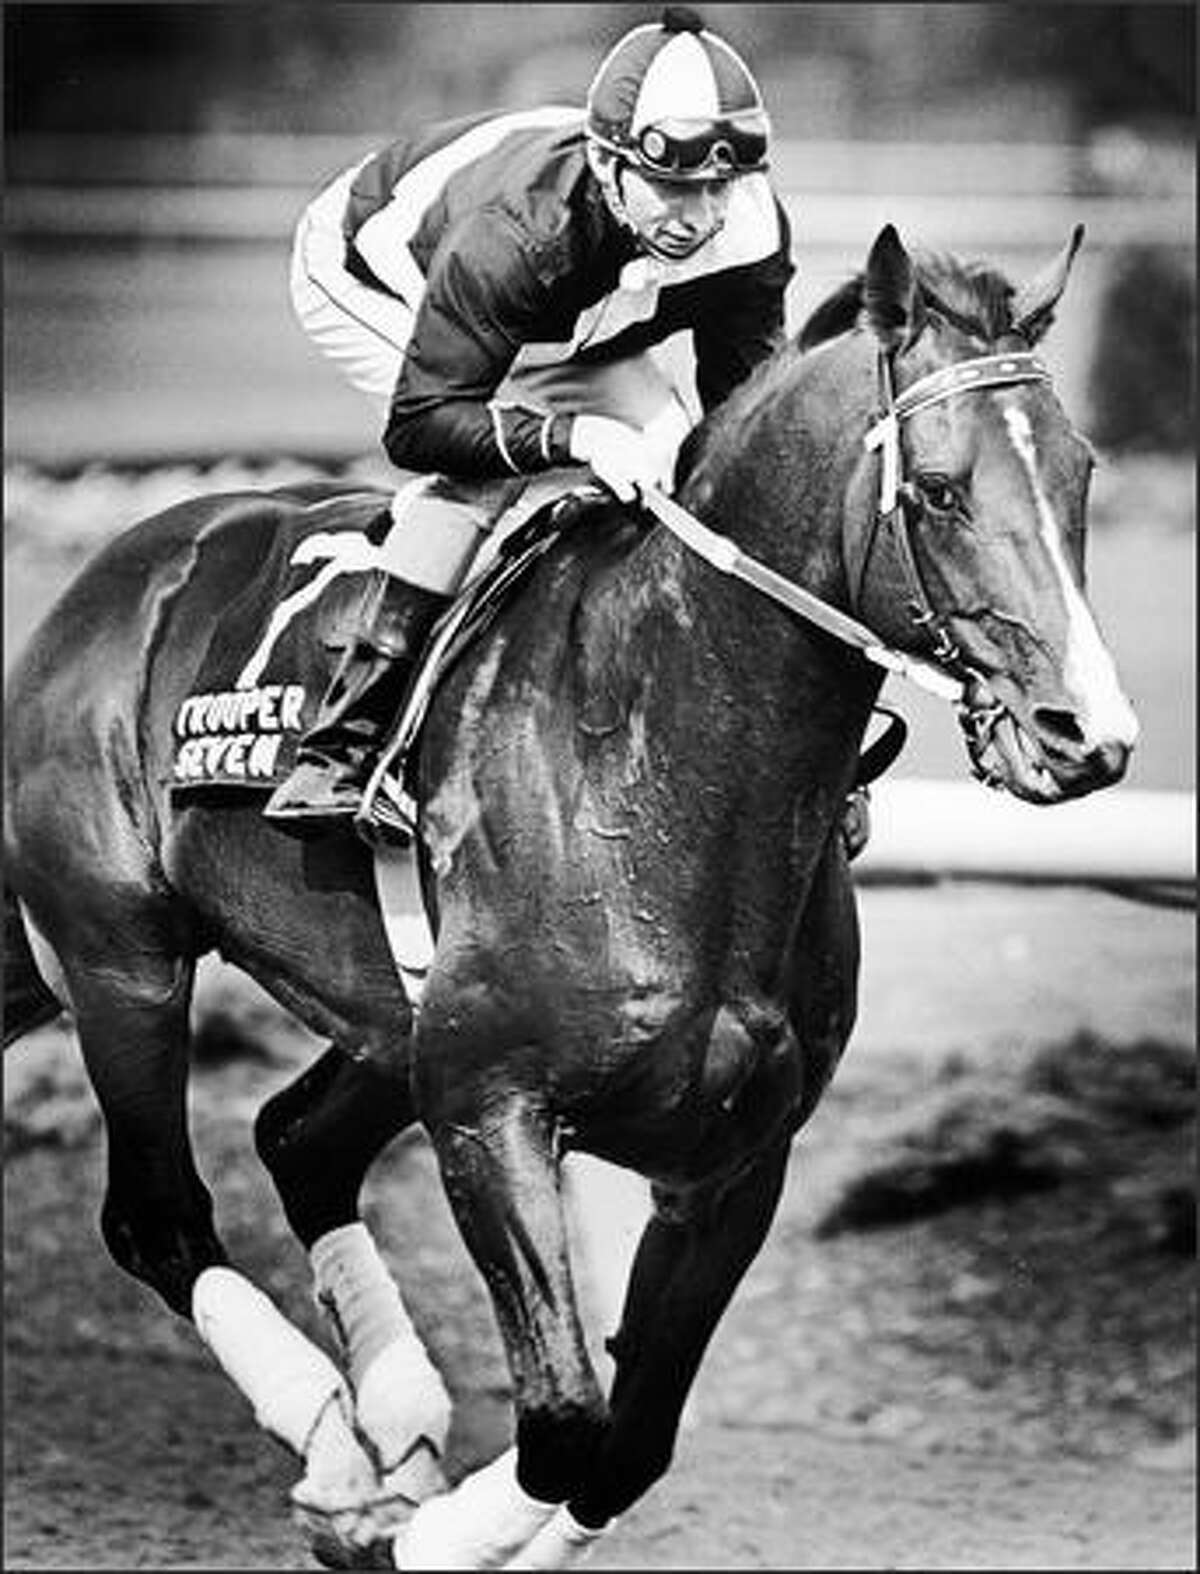 Trooper Seven, with Gary Baze riding, takes a last lap to the delight of adoring fans at Longacres in 1981.